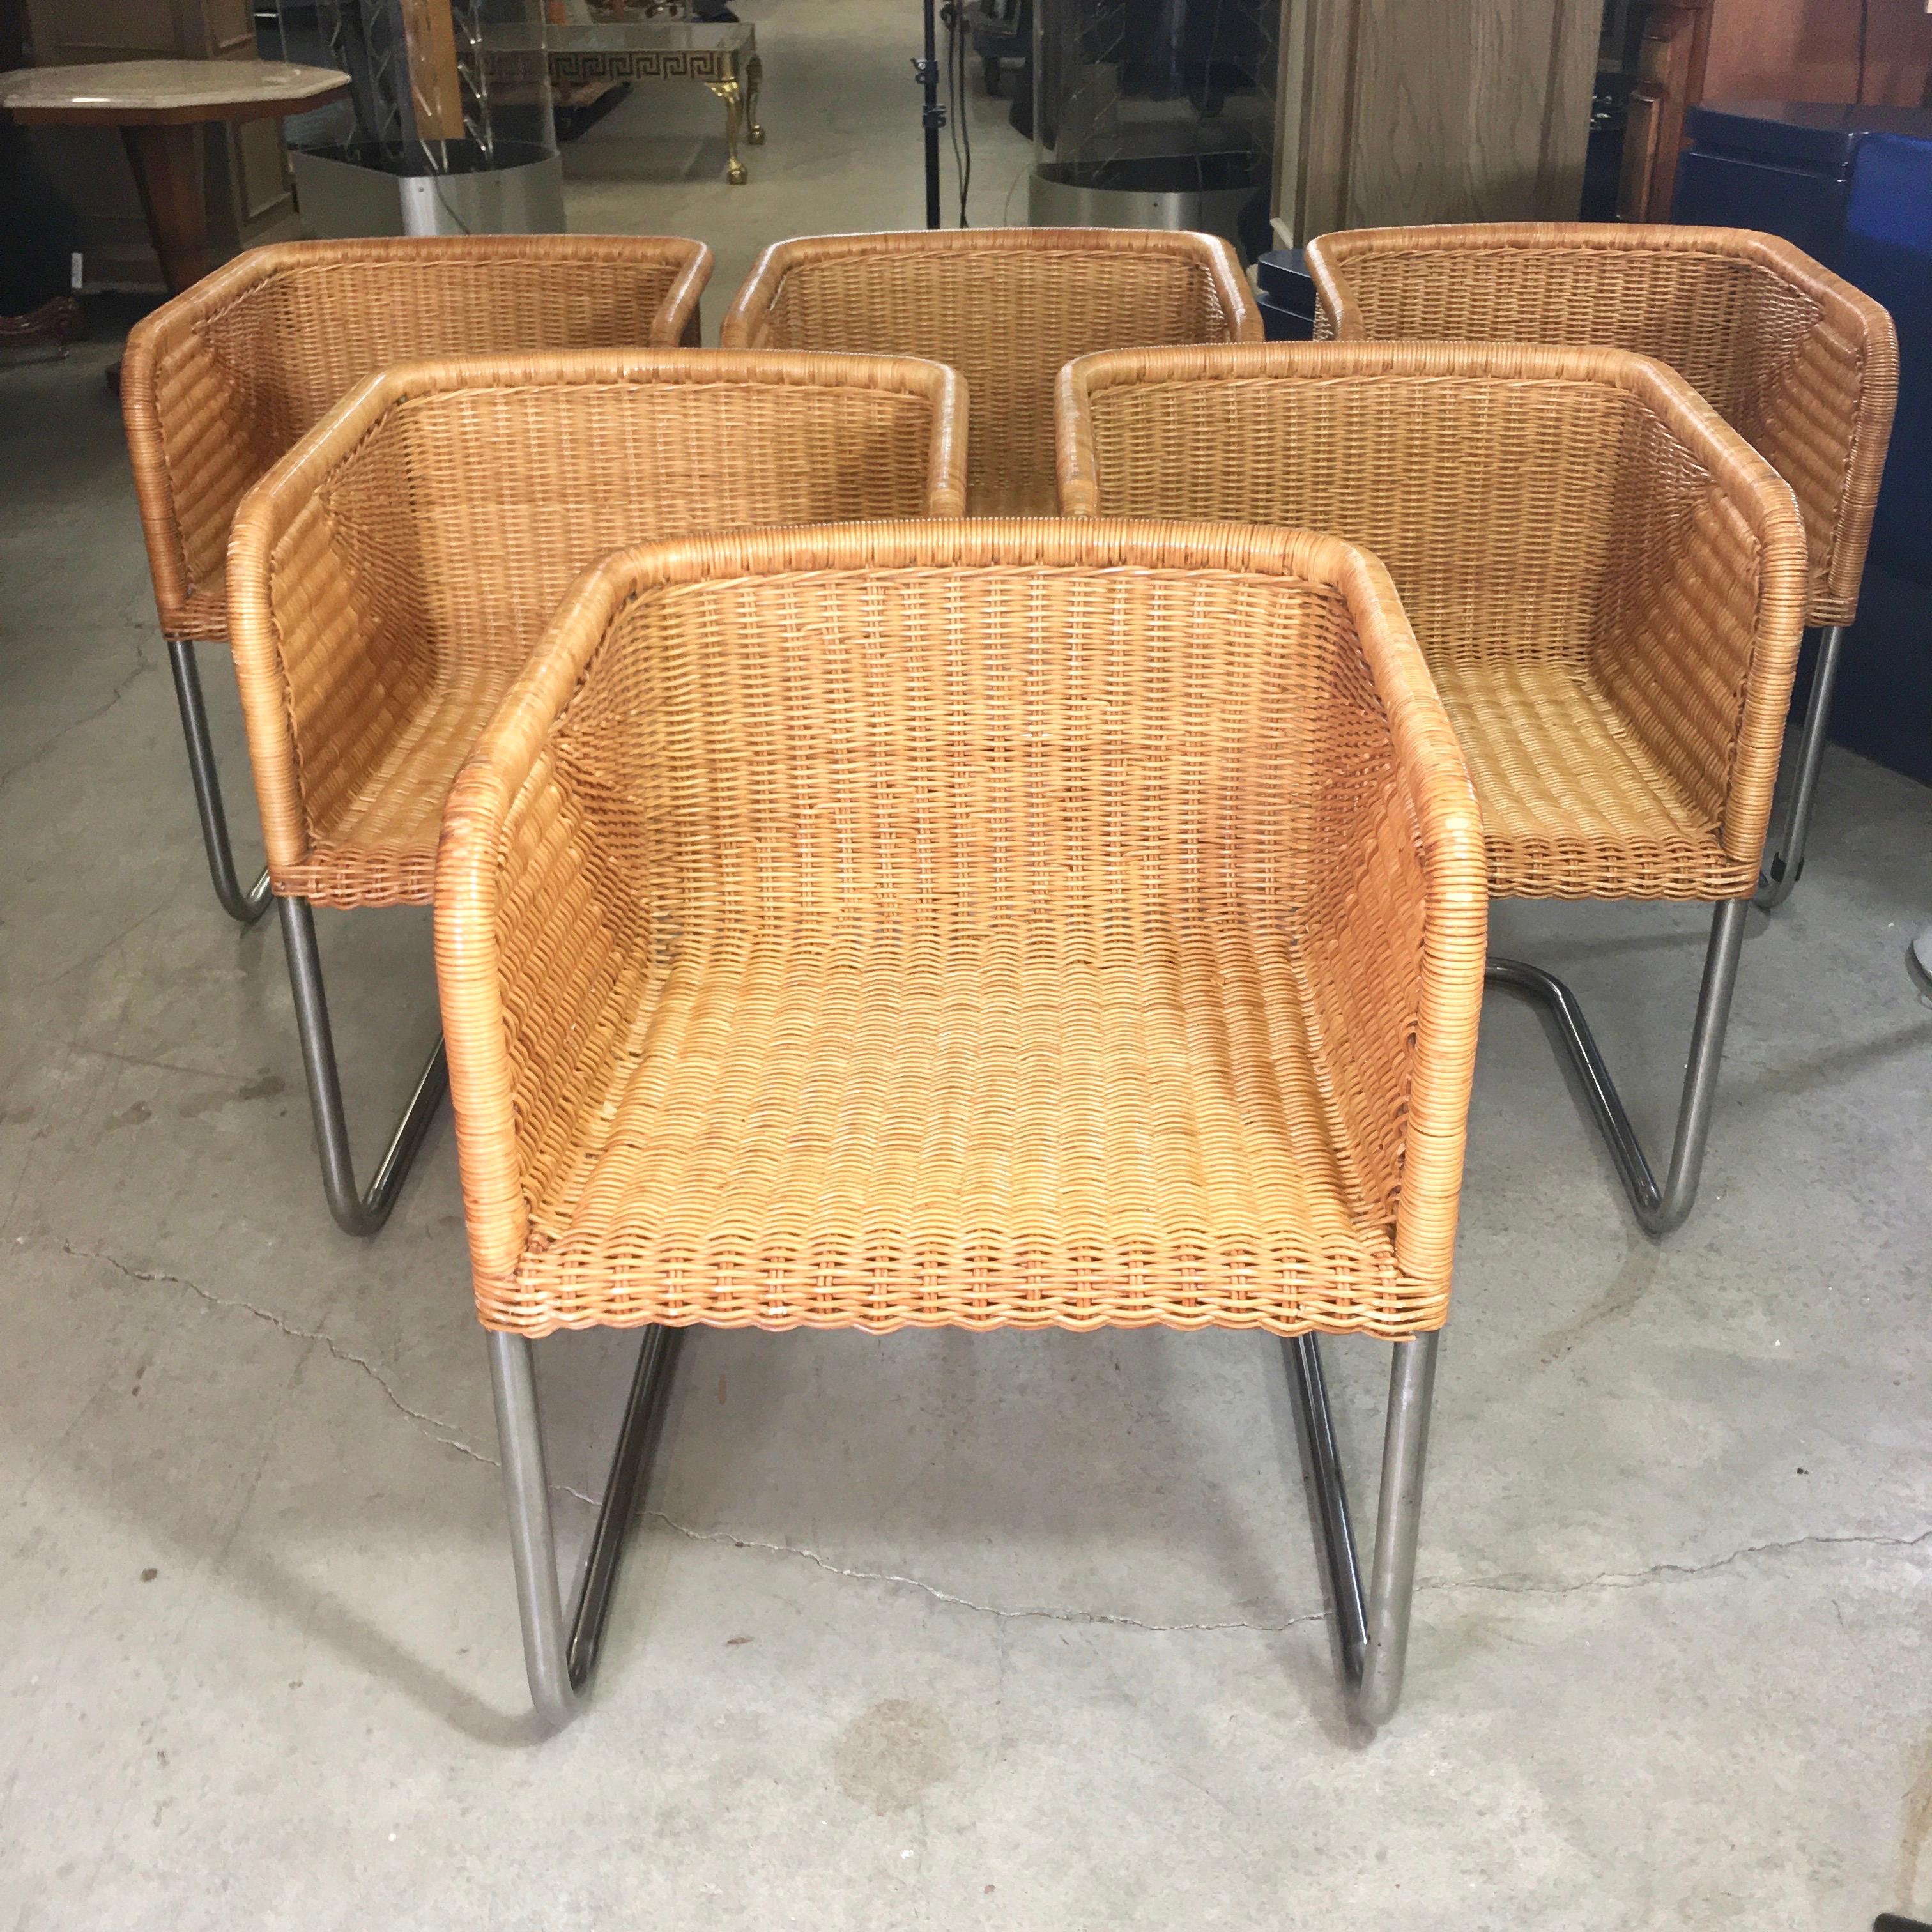 Hard to find a set of six of these comfortable and chic woven rattan and chromed tubular steel chairs from Harvey Probber. These are all in very good condition with no broken fibers and only slight wear to the varnish on top of the arms. They also